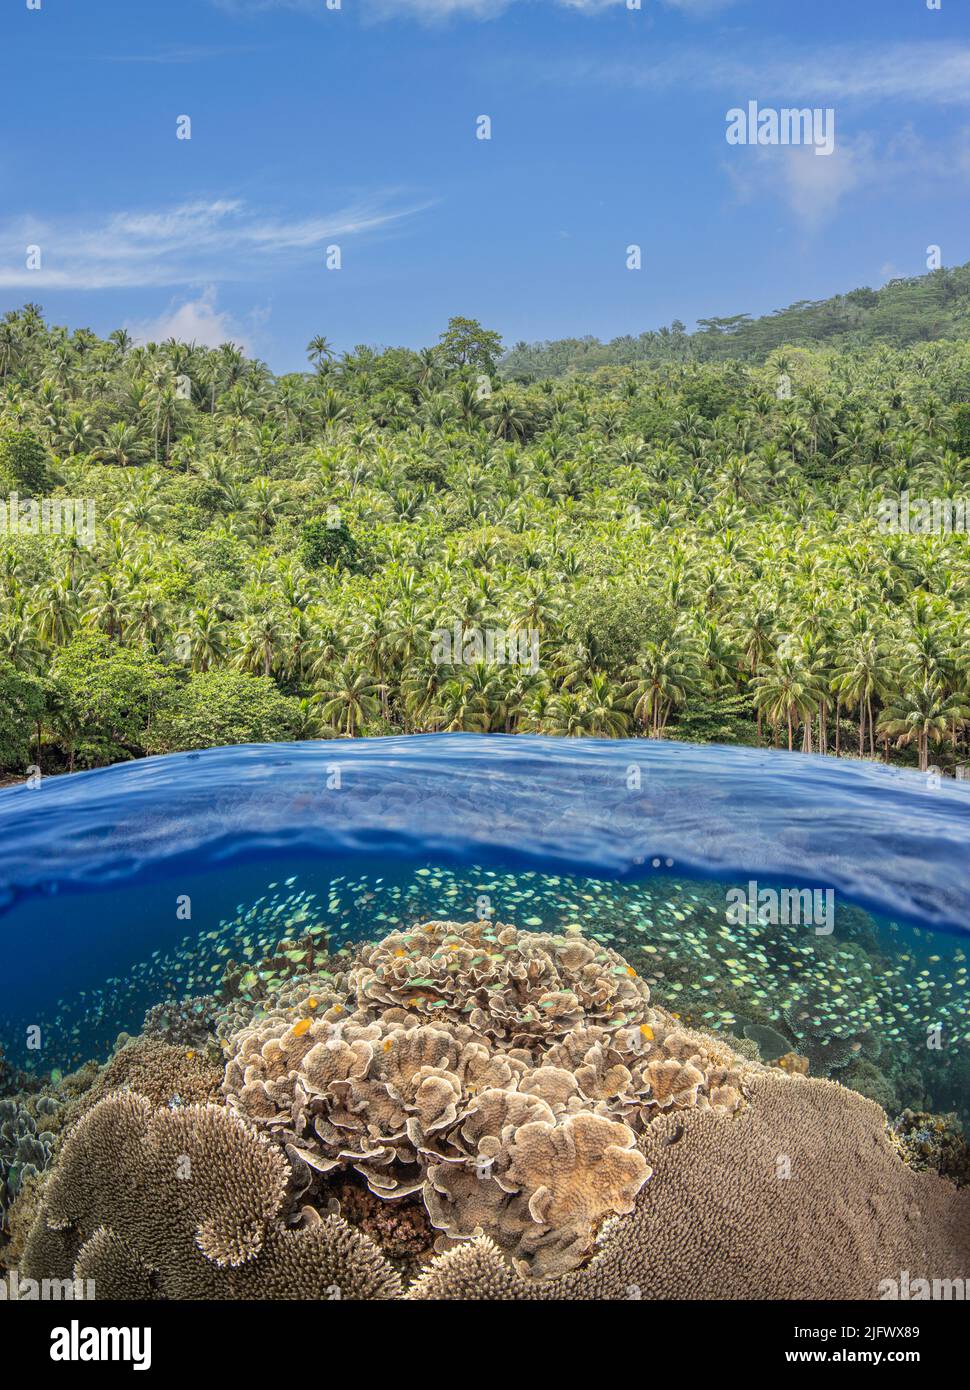 A split scene with a shallow hard coral reef below and palm tree laden island above, Philippines. Stock Photo